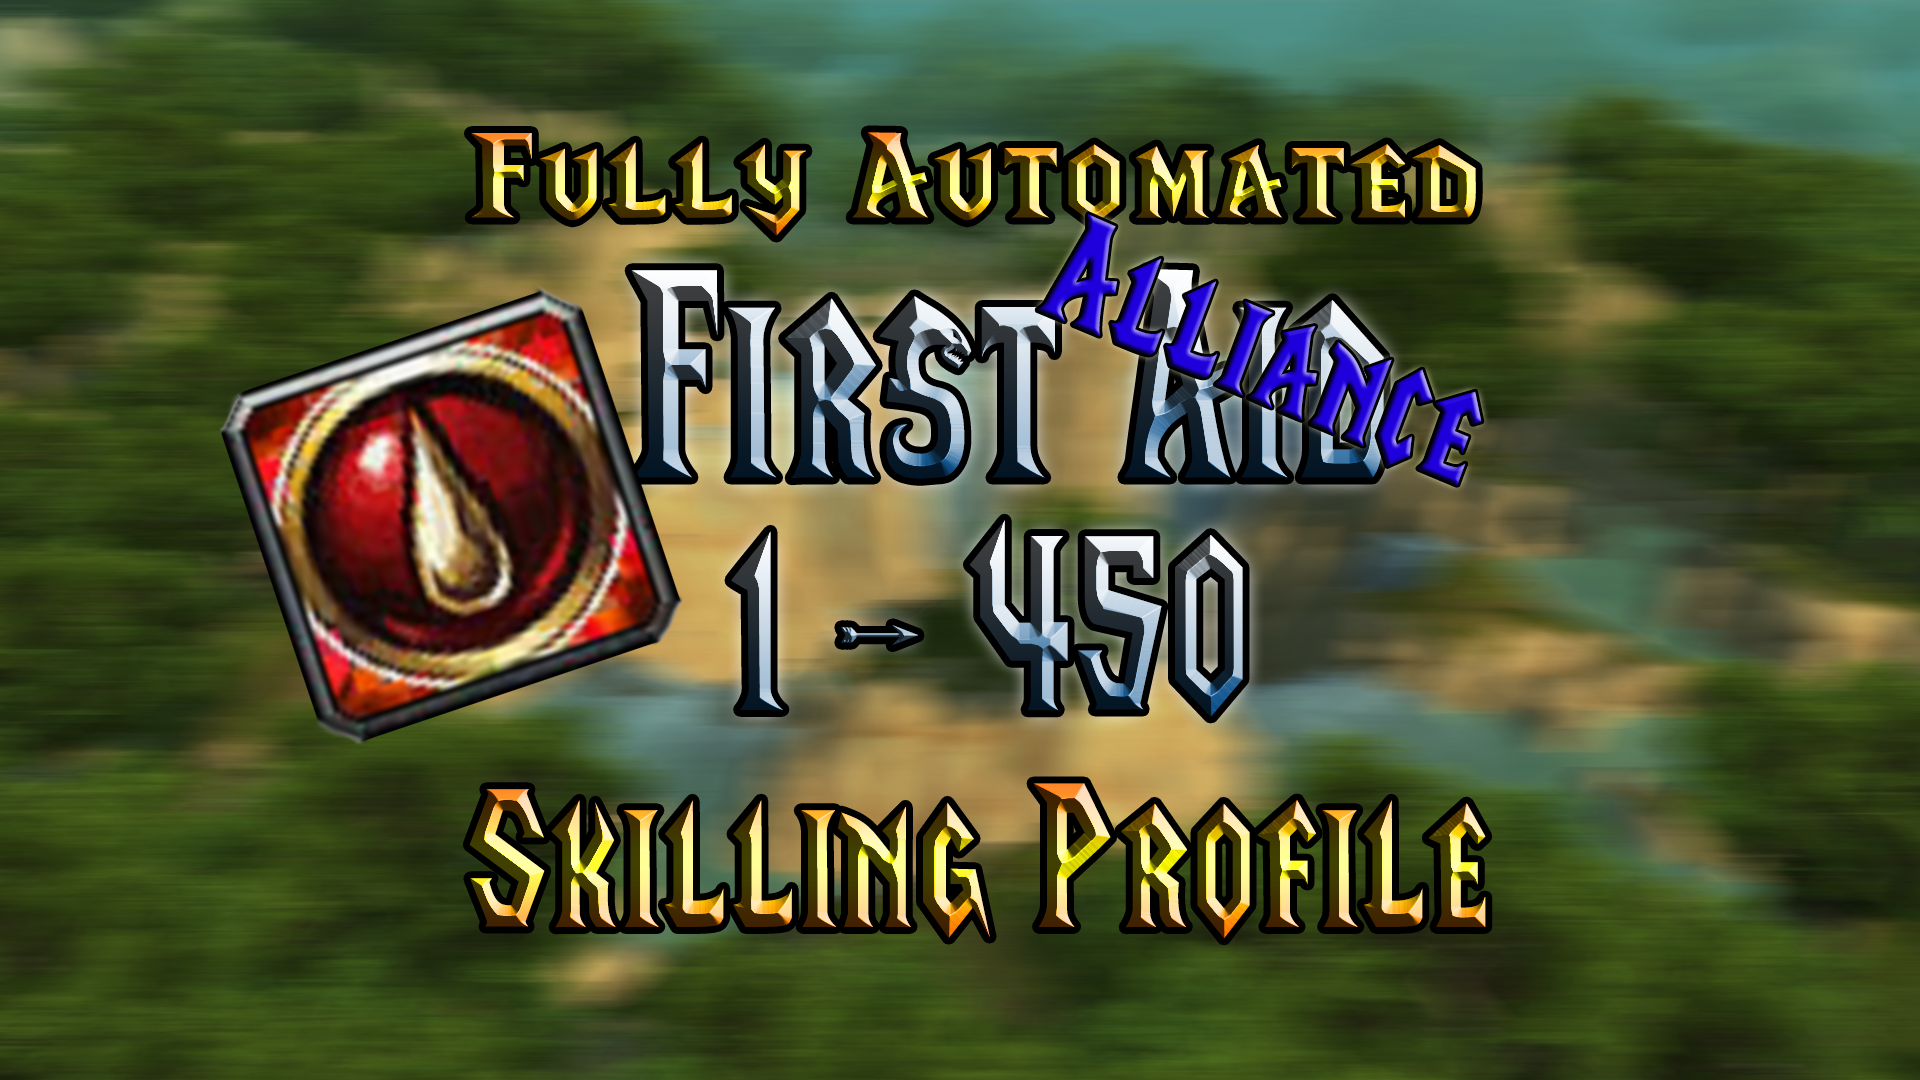 [WOTLK] First Aid - 1 to 450 - Alliance